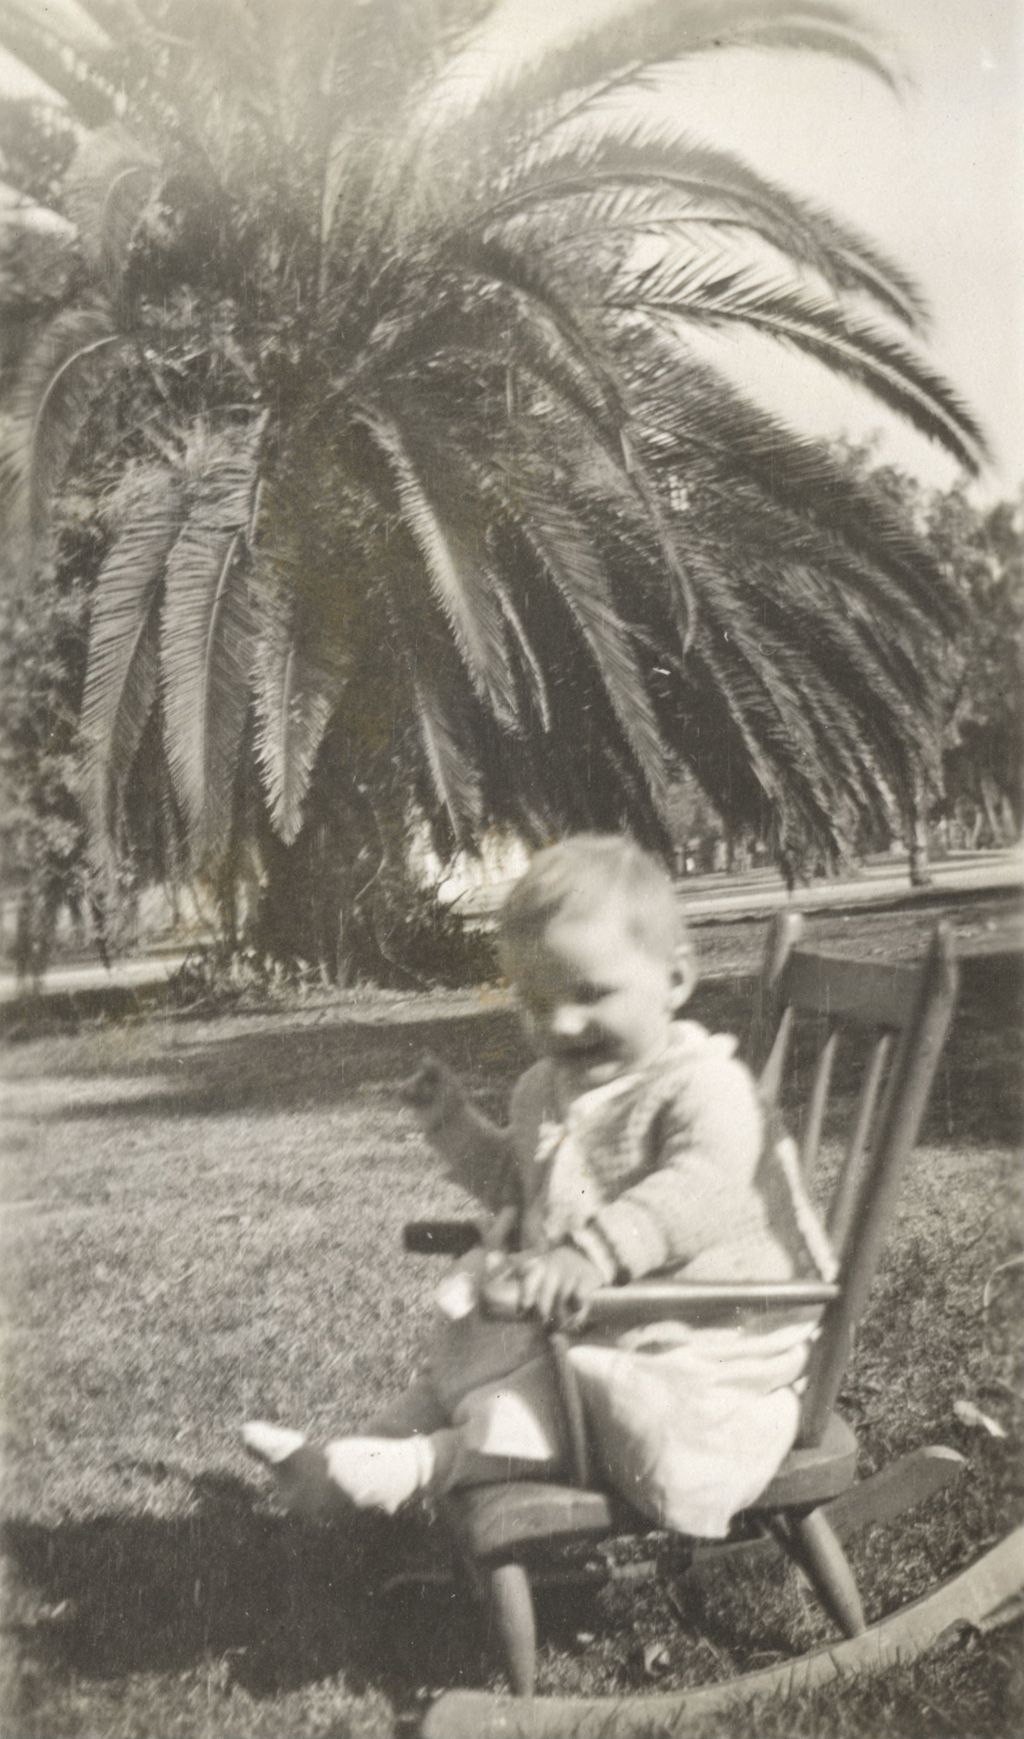 Child photographed during Jane Addams' trip to Mexico